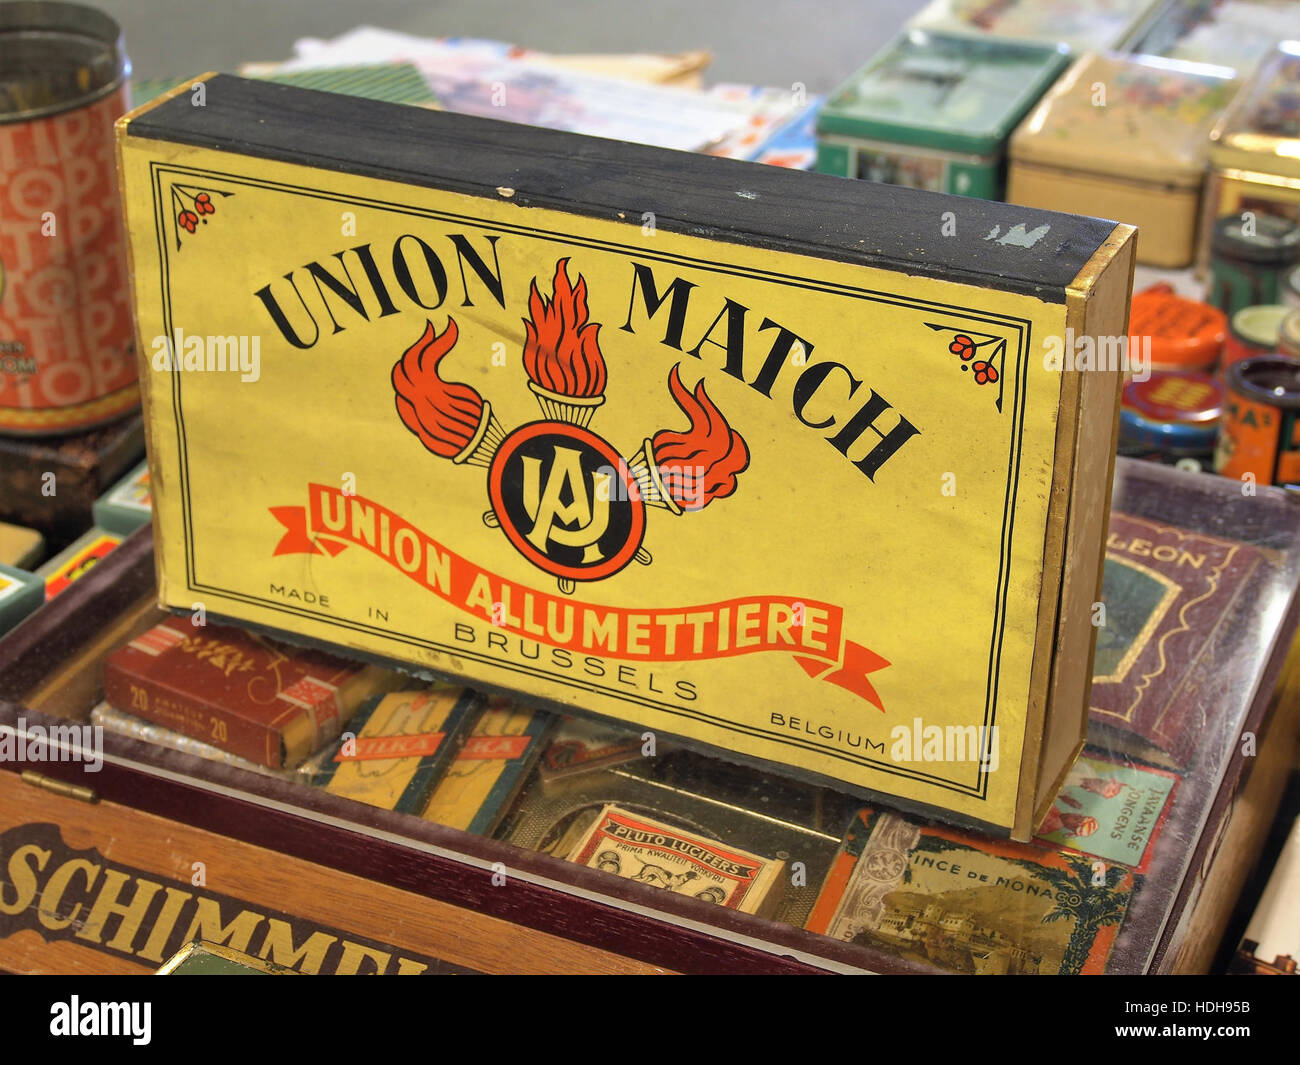 Union Match matchbox for advertising on a counter pic3 Stock Photo